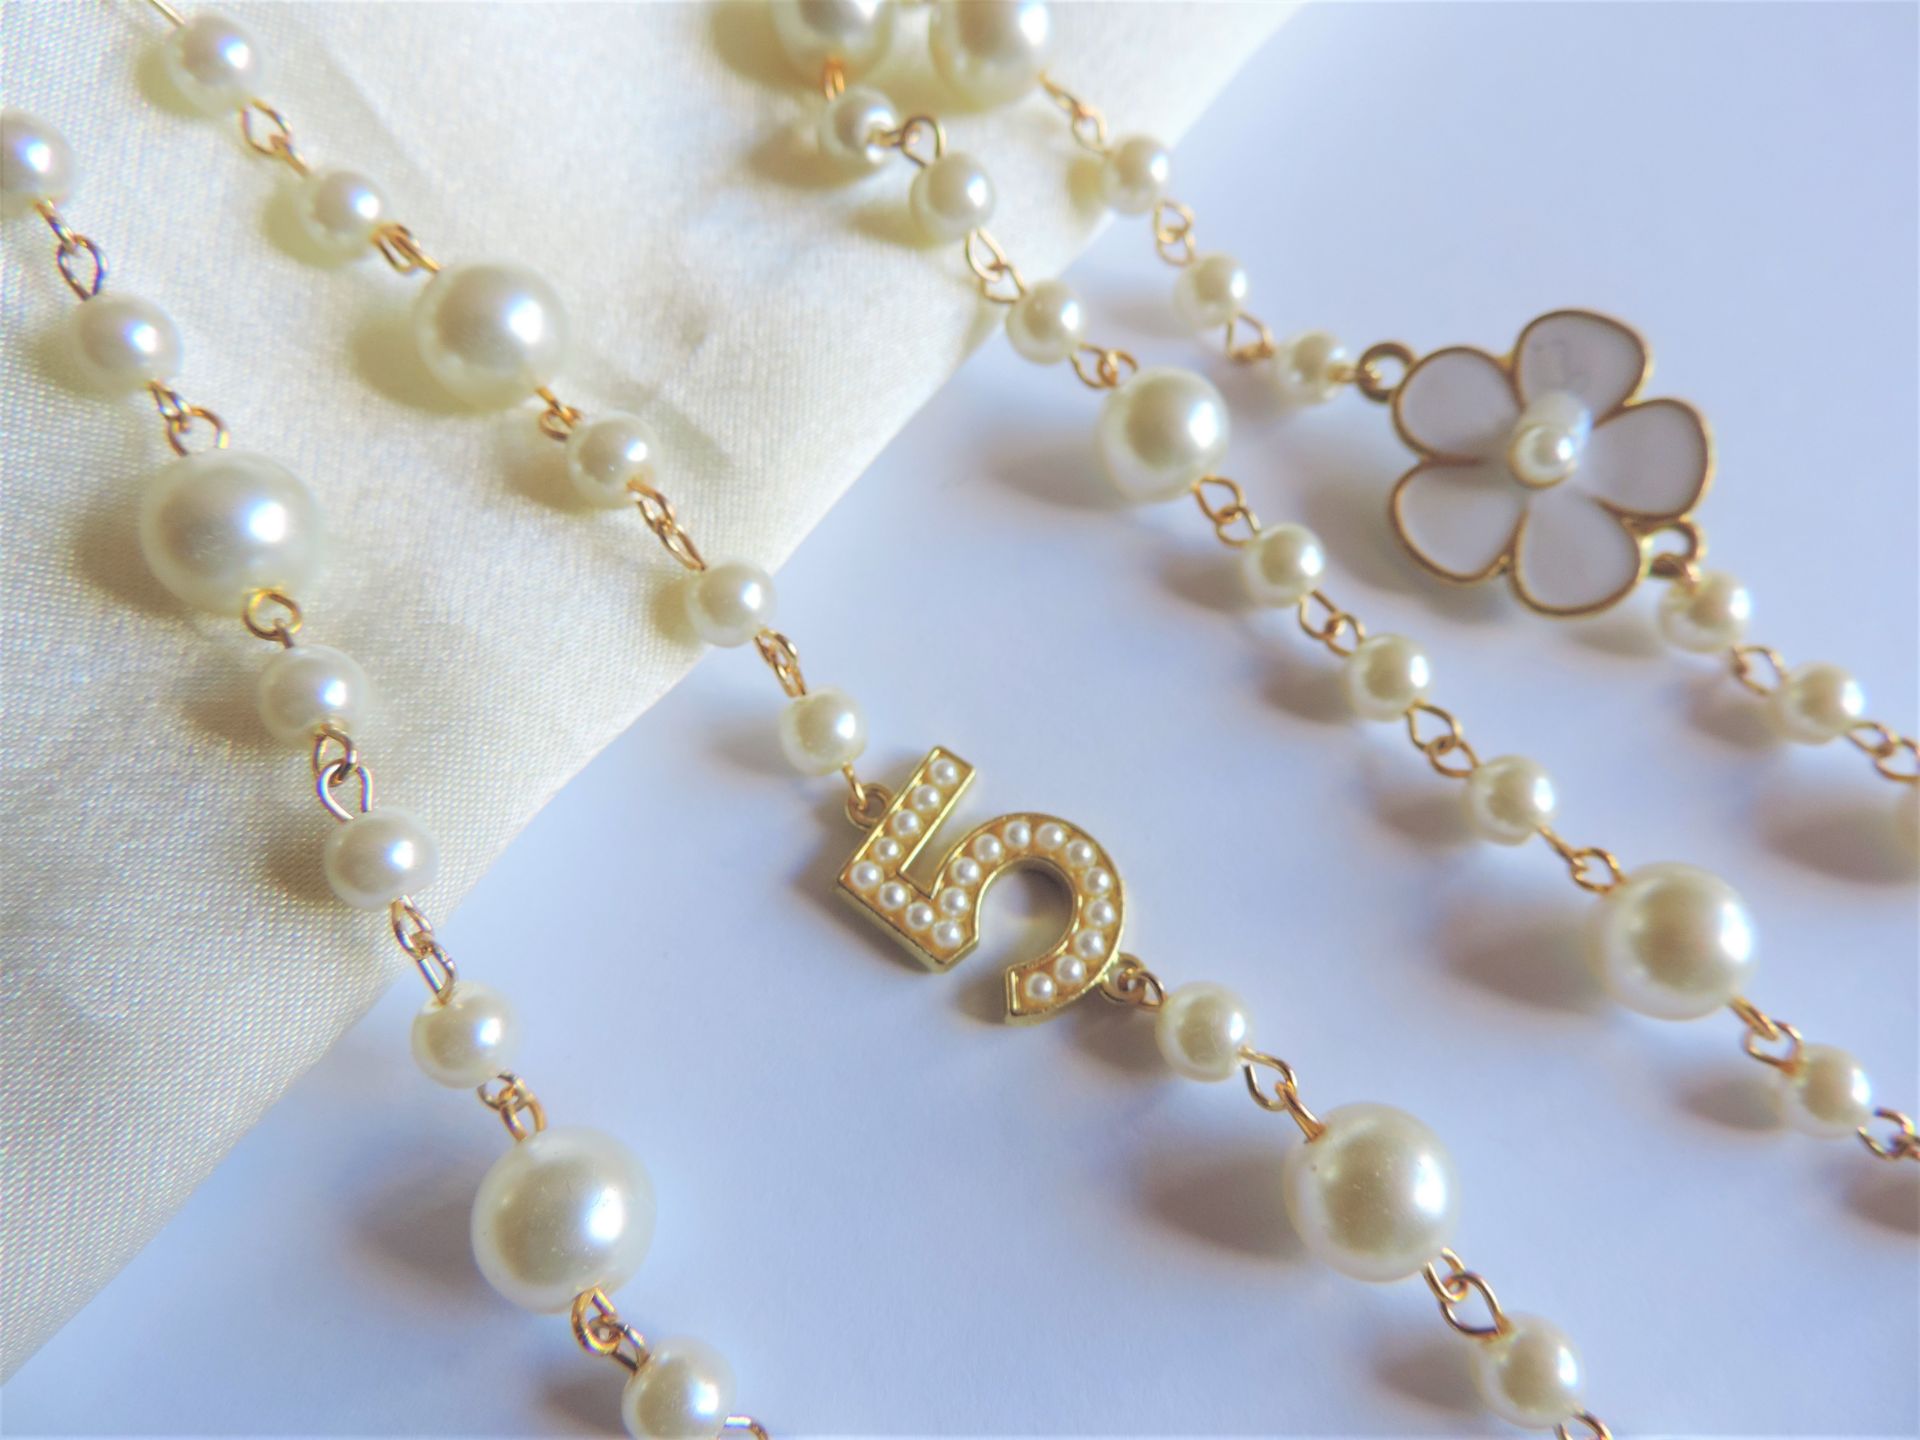 28 inch Pearl and Enamel No.5 Necklace - Image 4 of 4